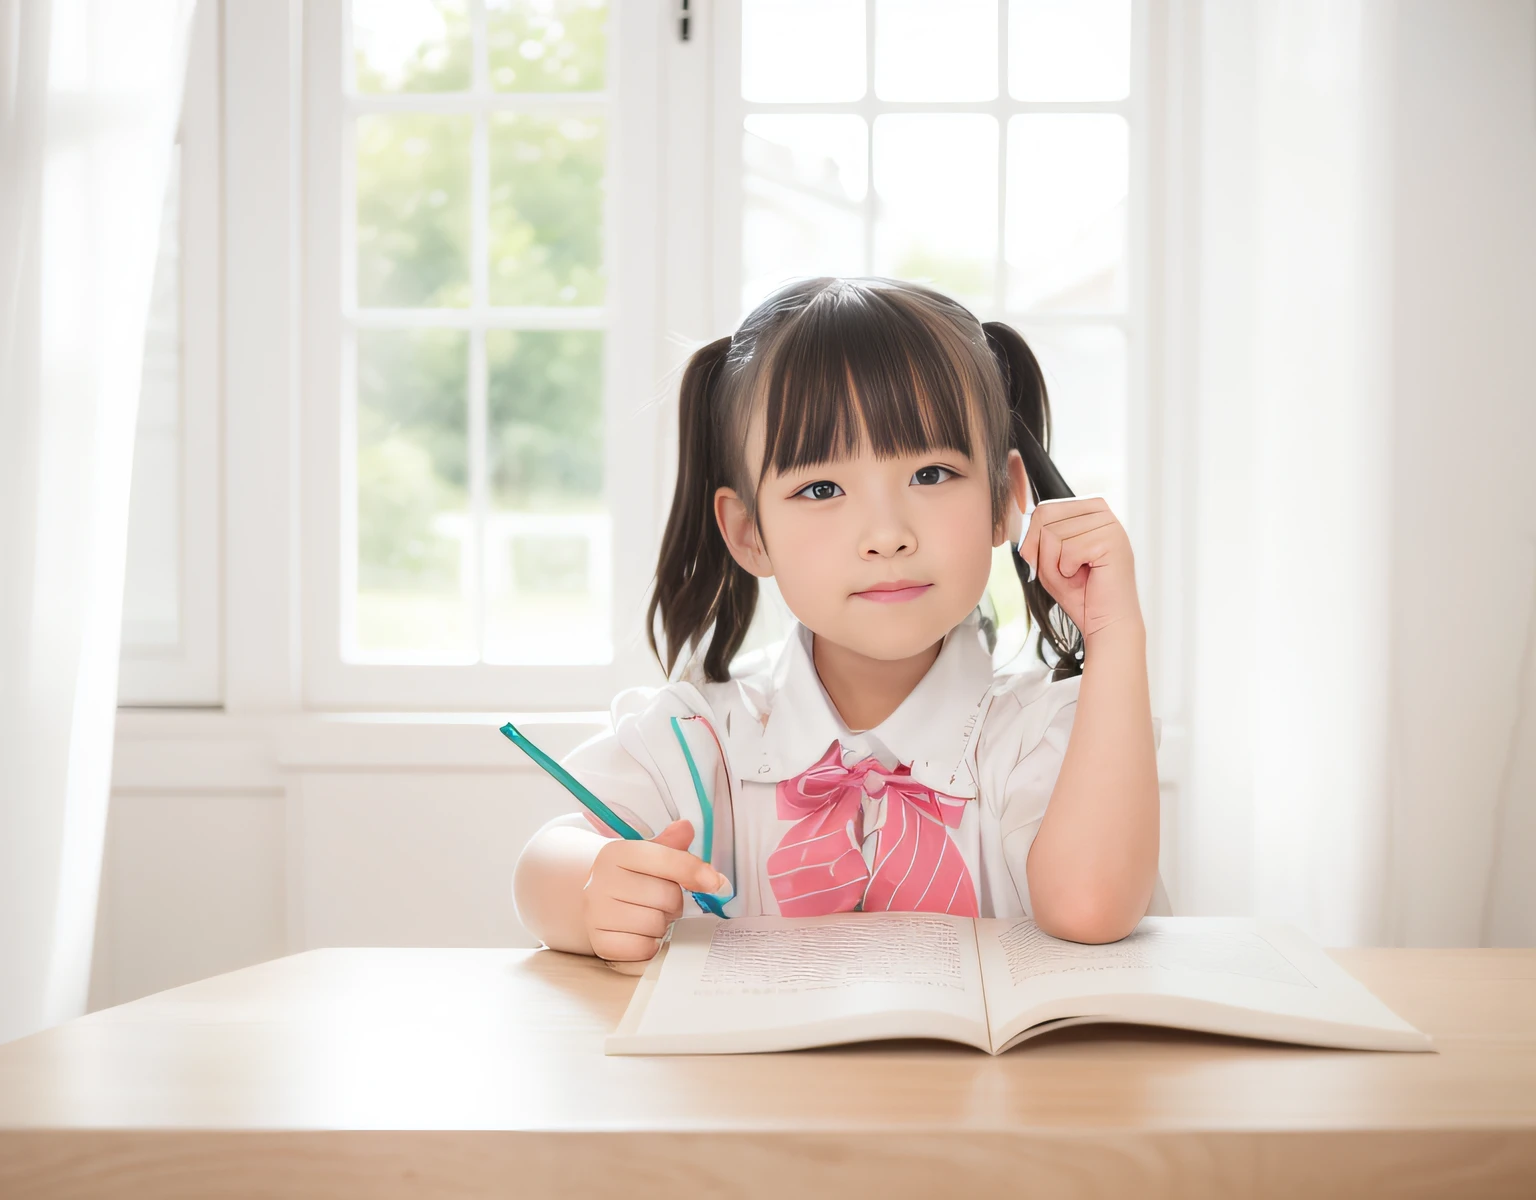 White room，White windows，There was a young girl sitting at the table，Hold a book and pencil, two pigtails hairstyle, with black pigtails, kids drawing, braid hairstyle，Natural fingers。holding a pen，